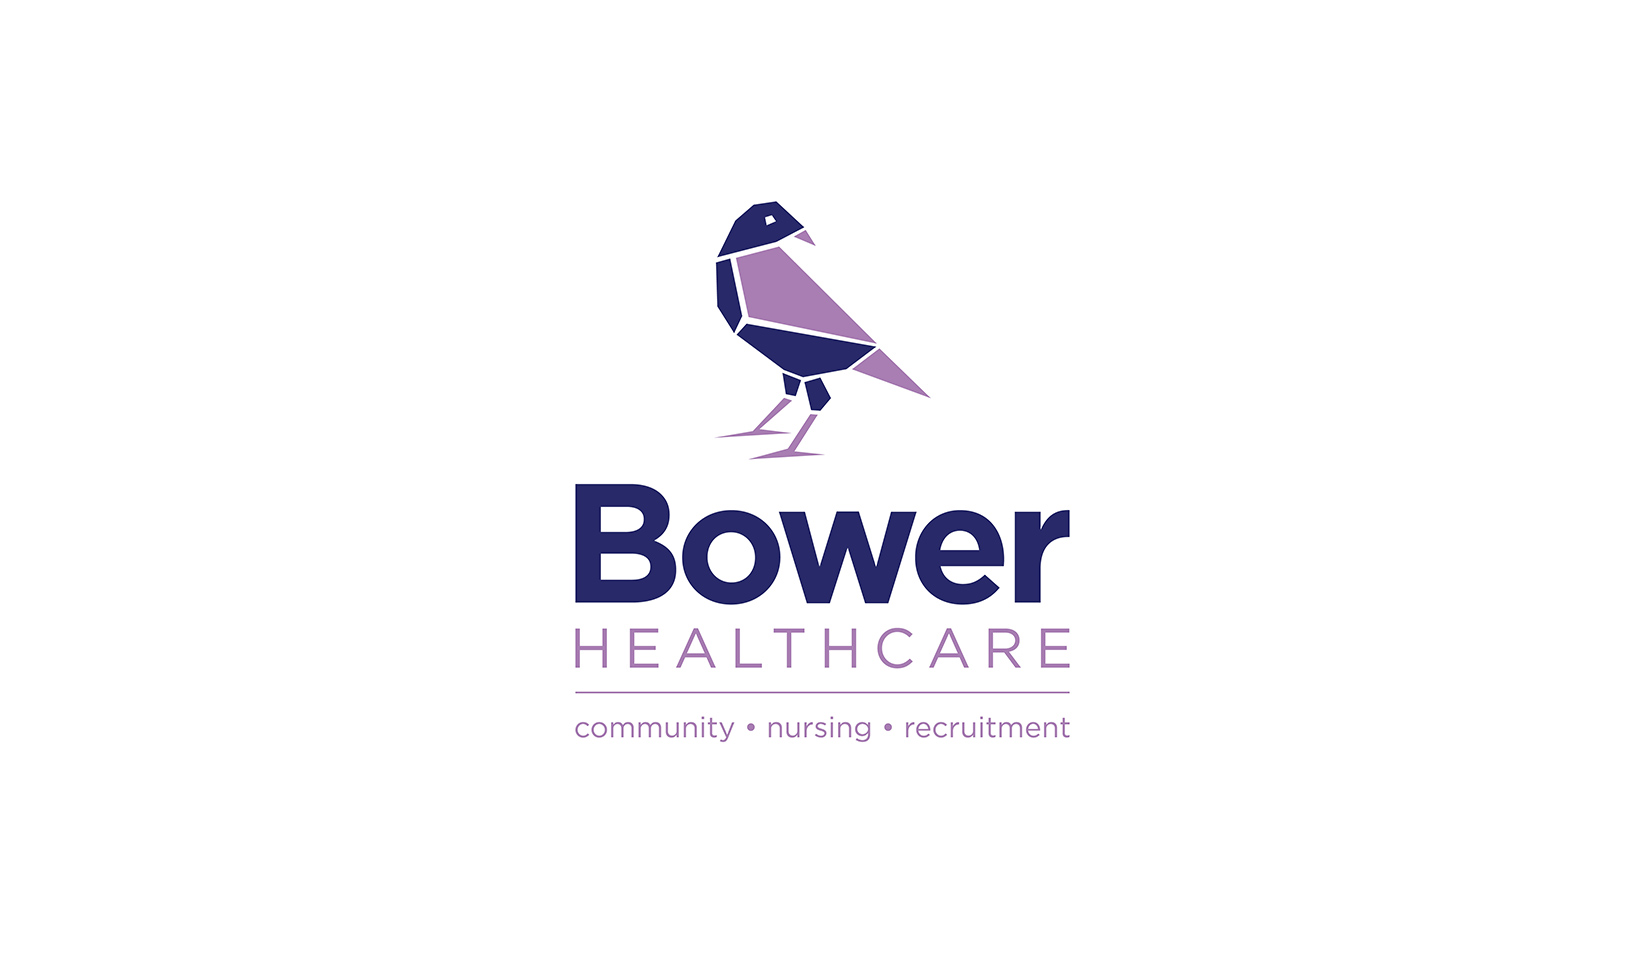 Bower Healthcare Brand Identity Development by Think Creative Agency 8